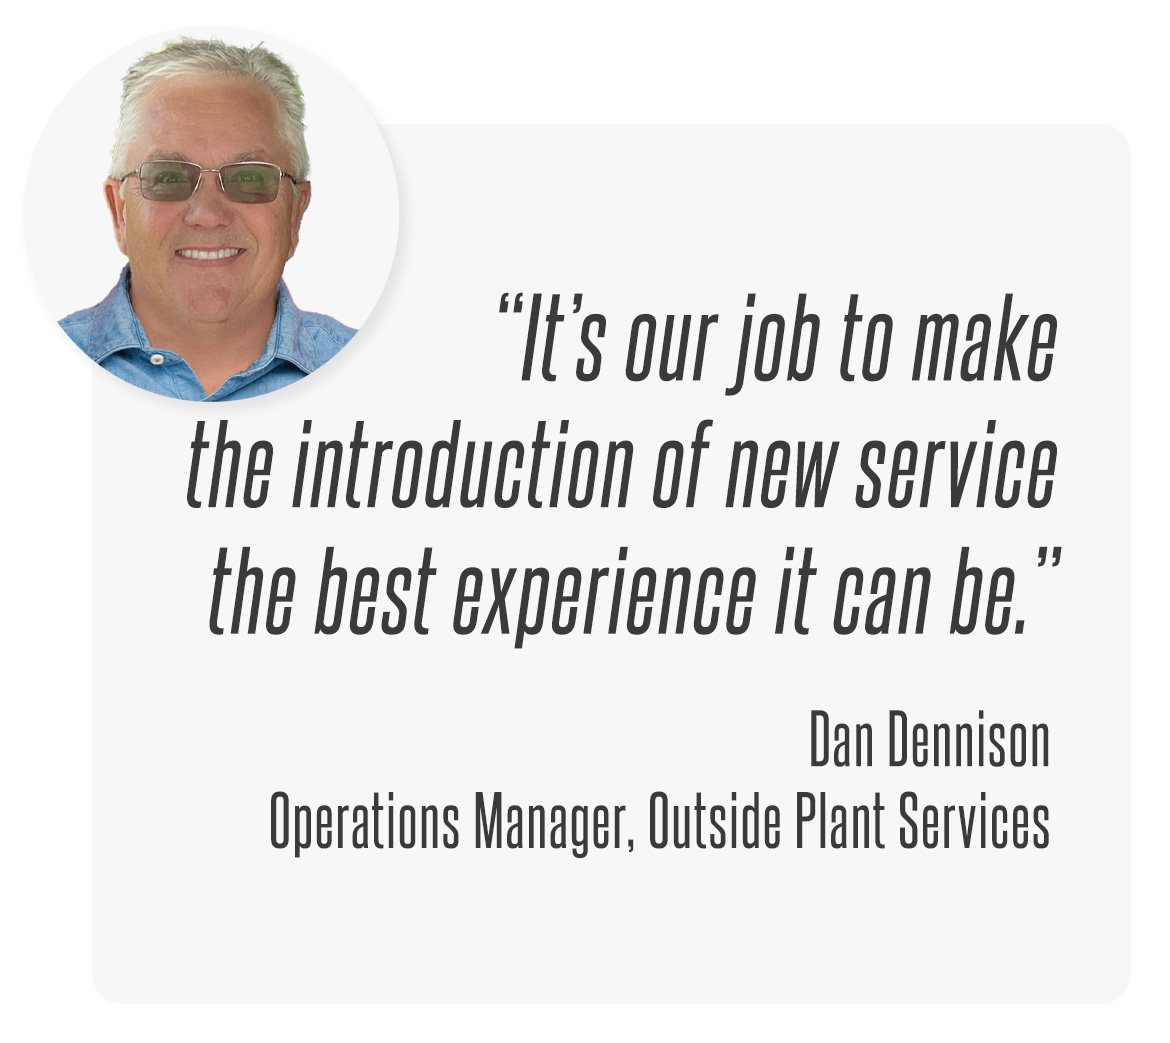 Dan Dennison, Operations Manager, OSP Services